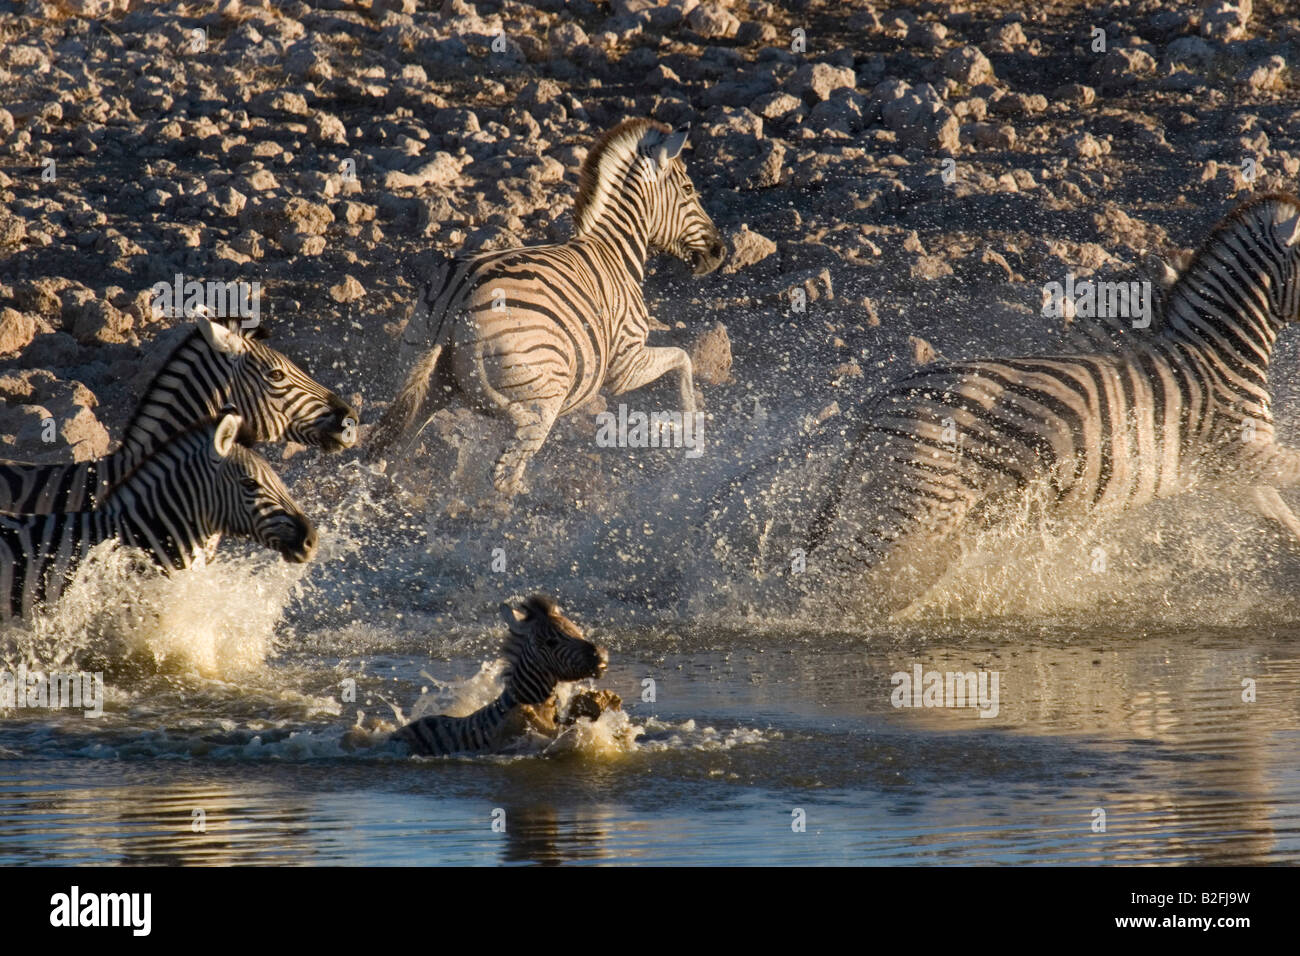 Nervous Zebras flee a Water Hole Stock Photo